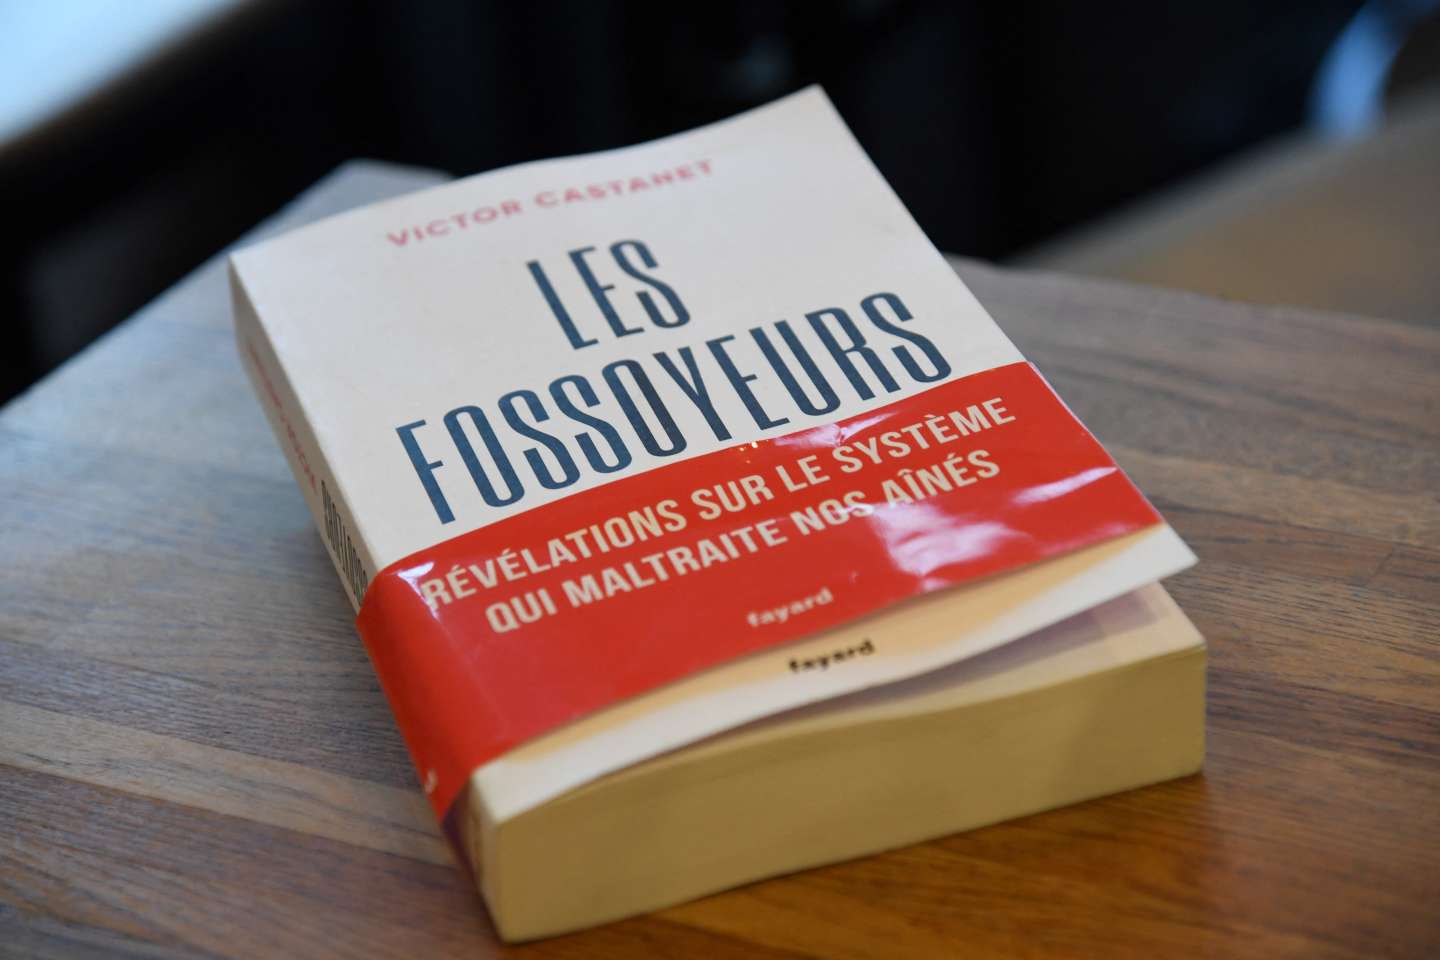 Orpea scandal: in his reissue of “Fossoyeurs”, Victor Castanet reveals the pressures and manipulations suffered during his investigation